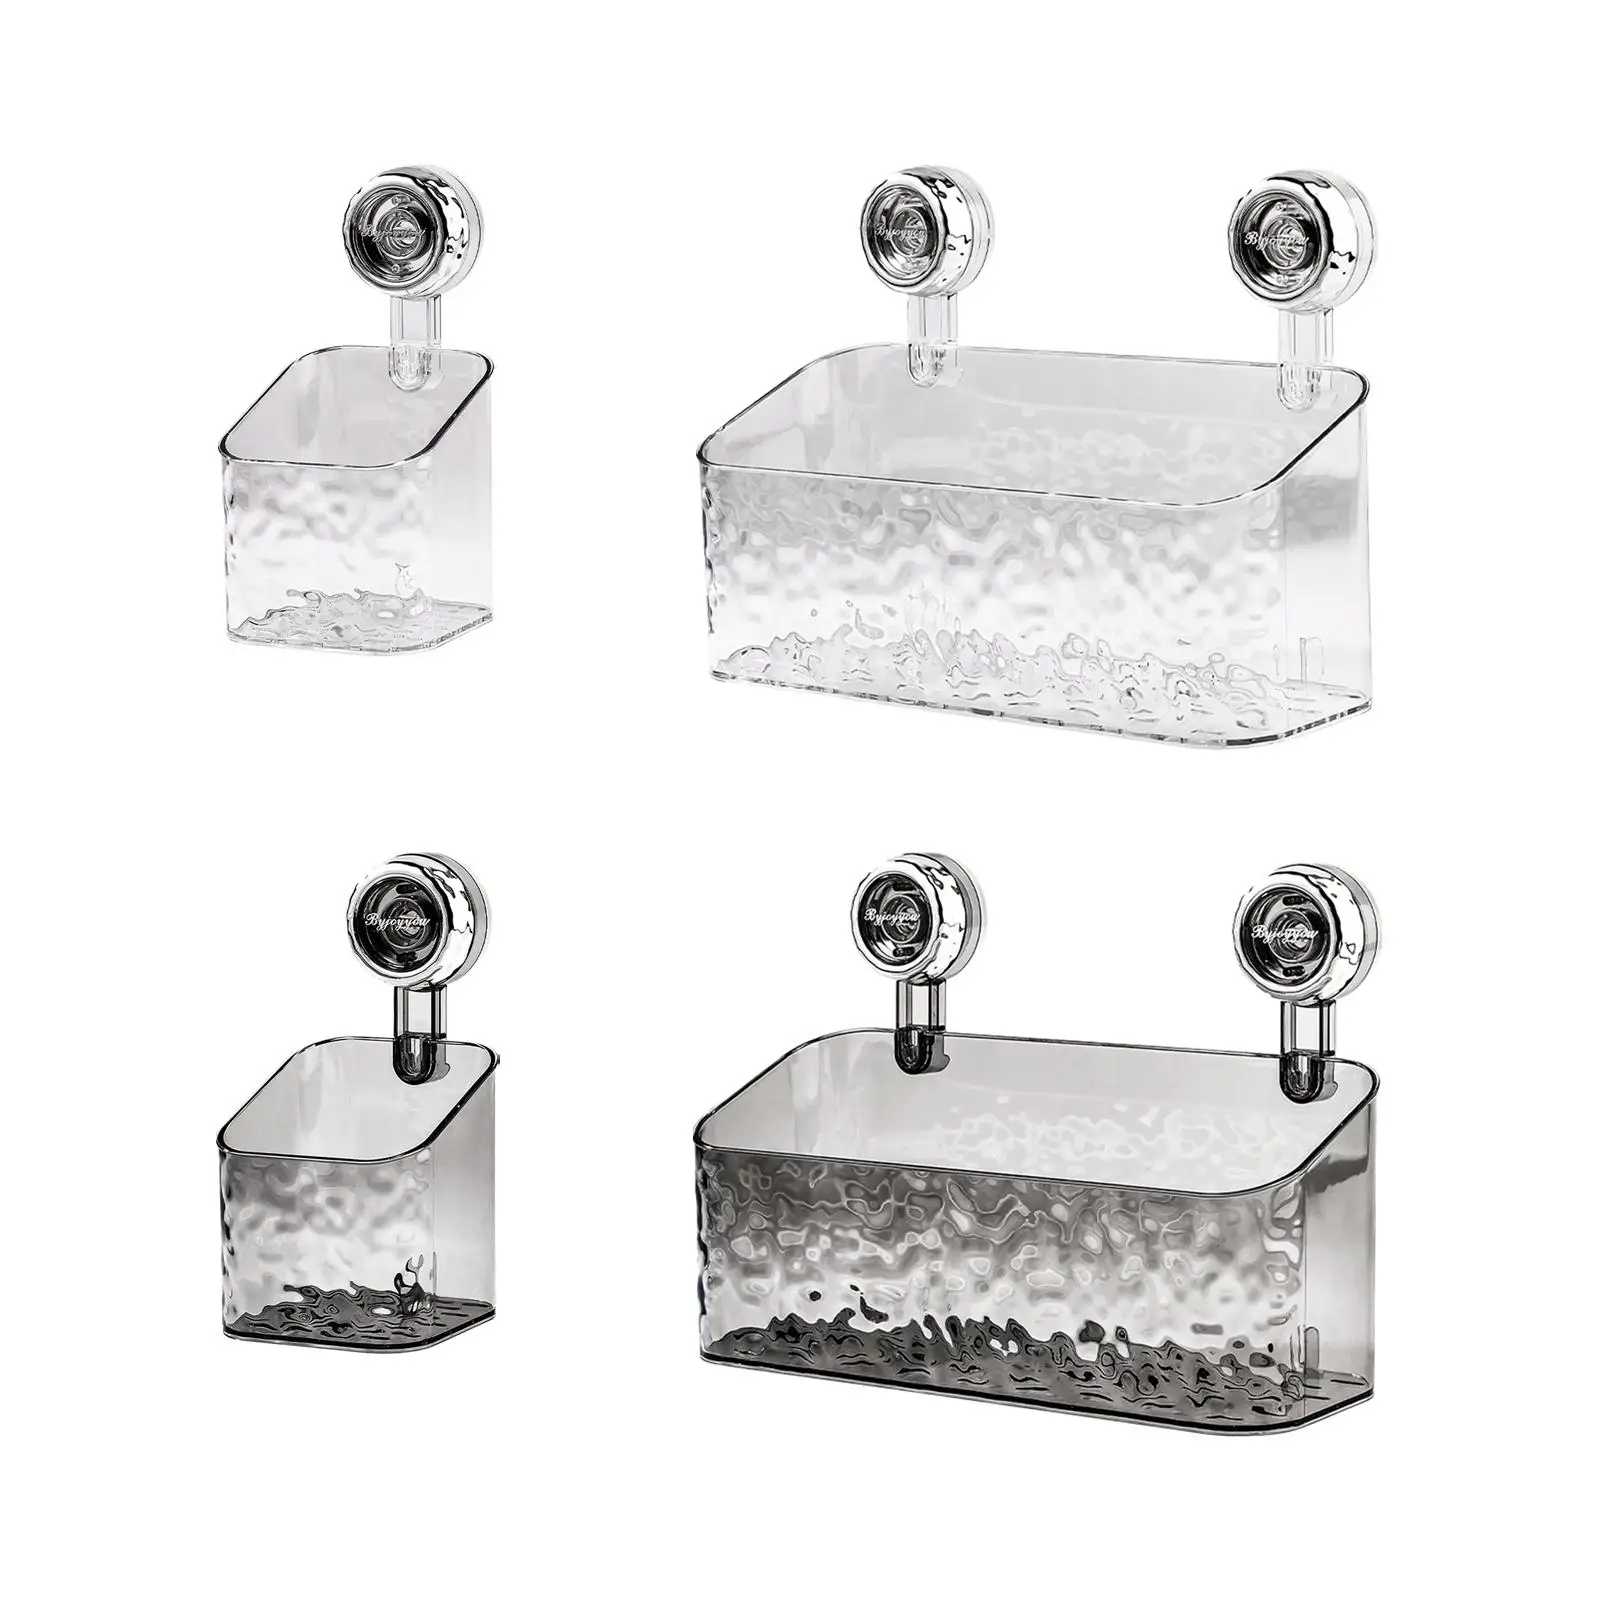 Shower Caddy Suction Cup Bathroom No Drilling Need Shower Rooms Durable Modern Bathrooms with Drain Holes Shower Organizer